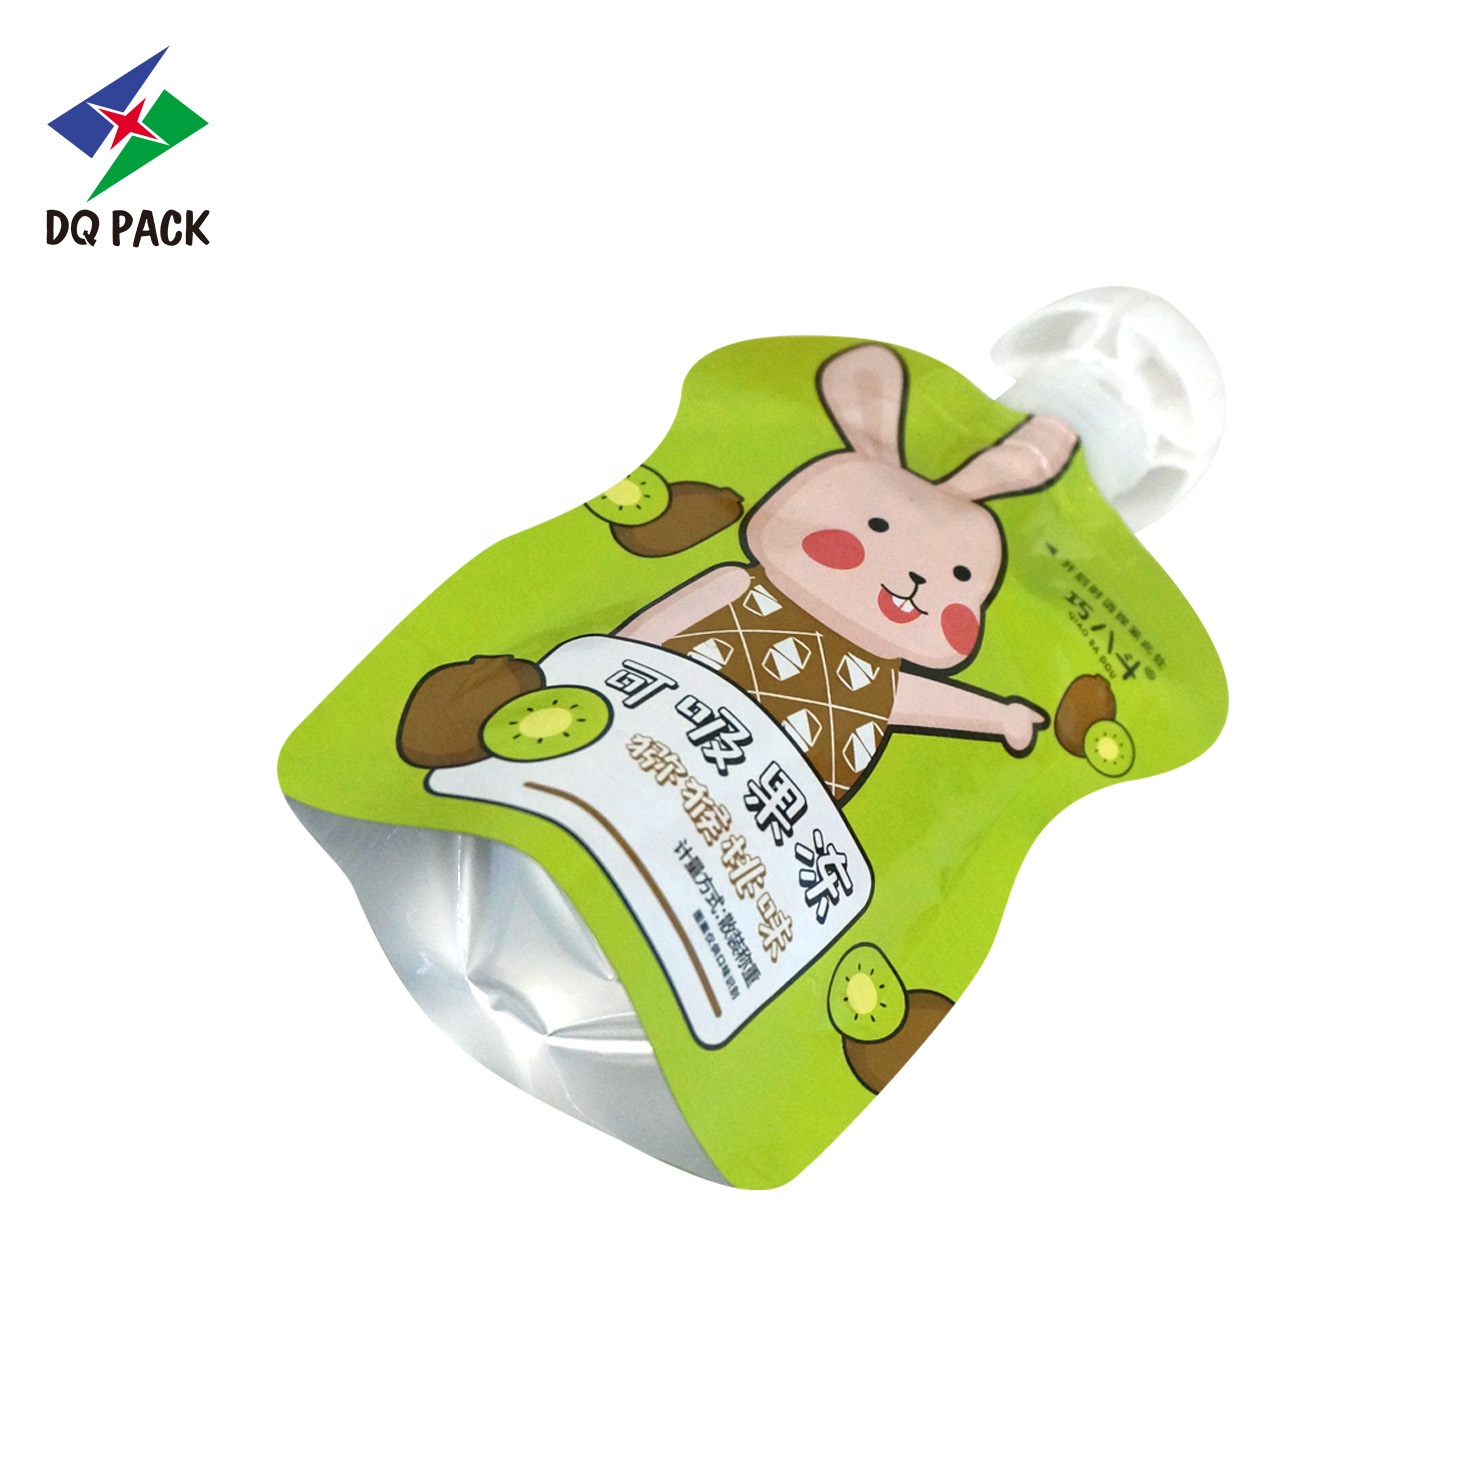 DQ PACK Custom Logo Jelly Bag Suppliers China  Beverage Packaging Spout Bag Gualapack  Nozzle Bag